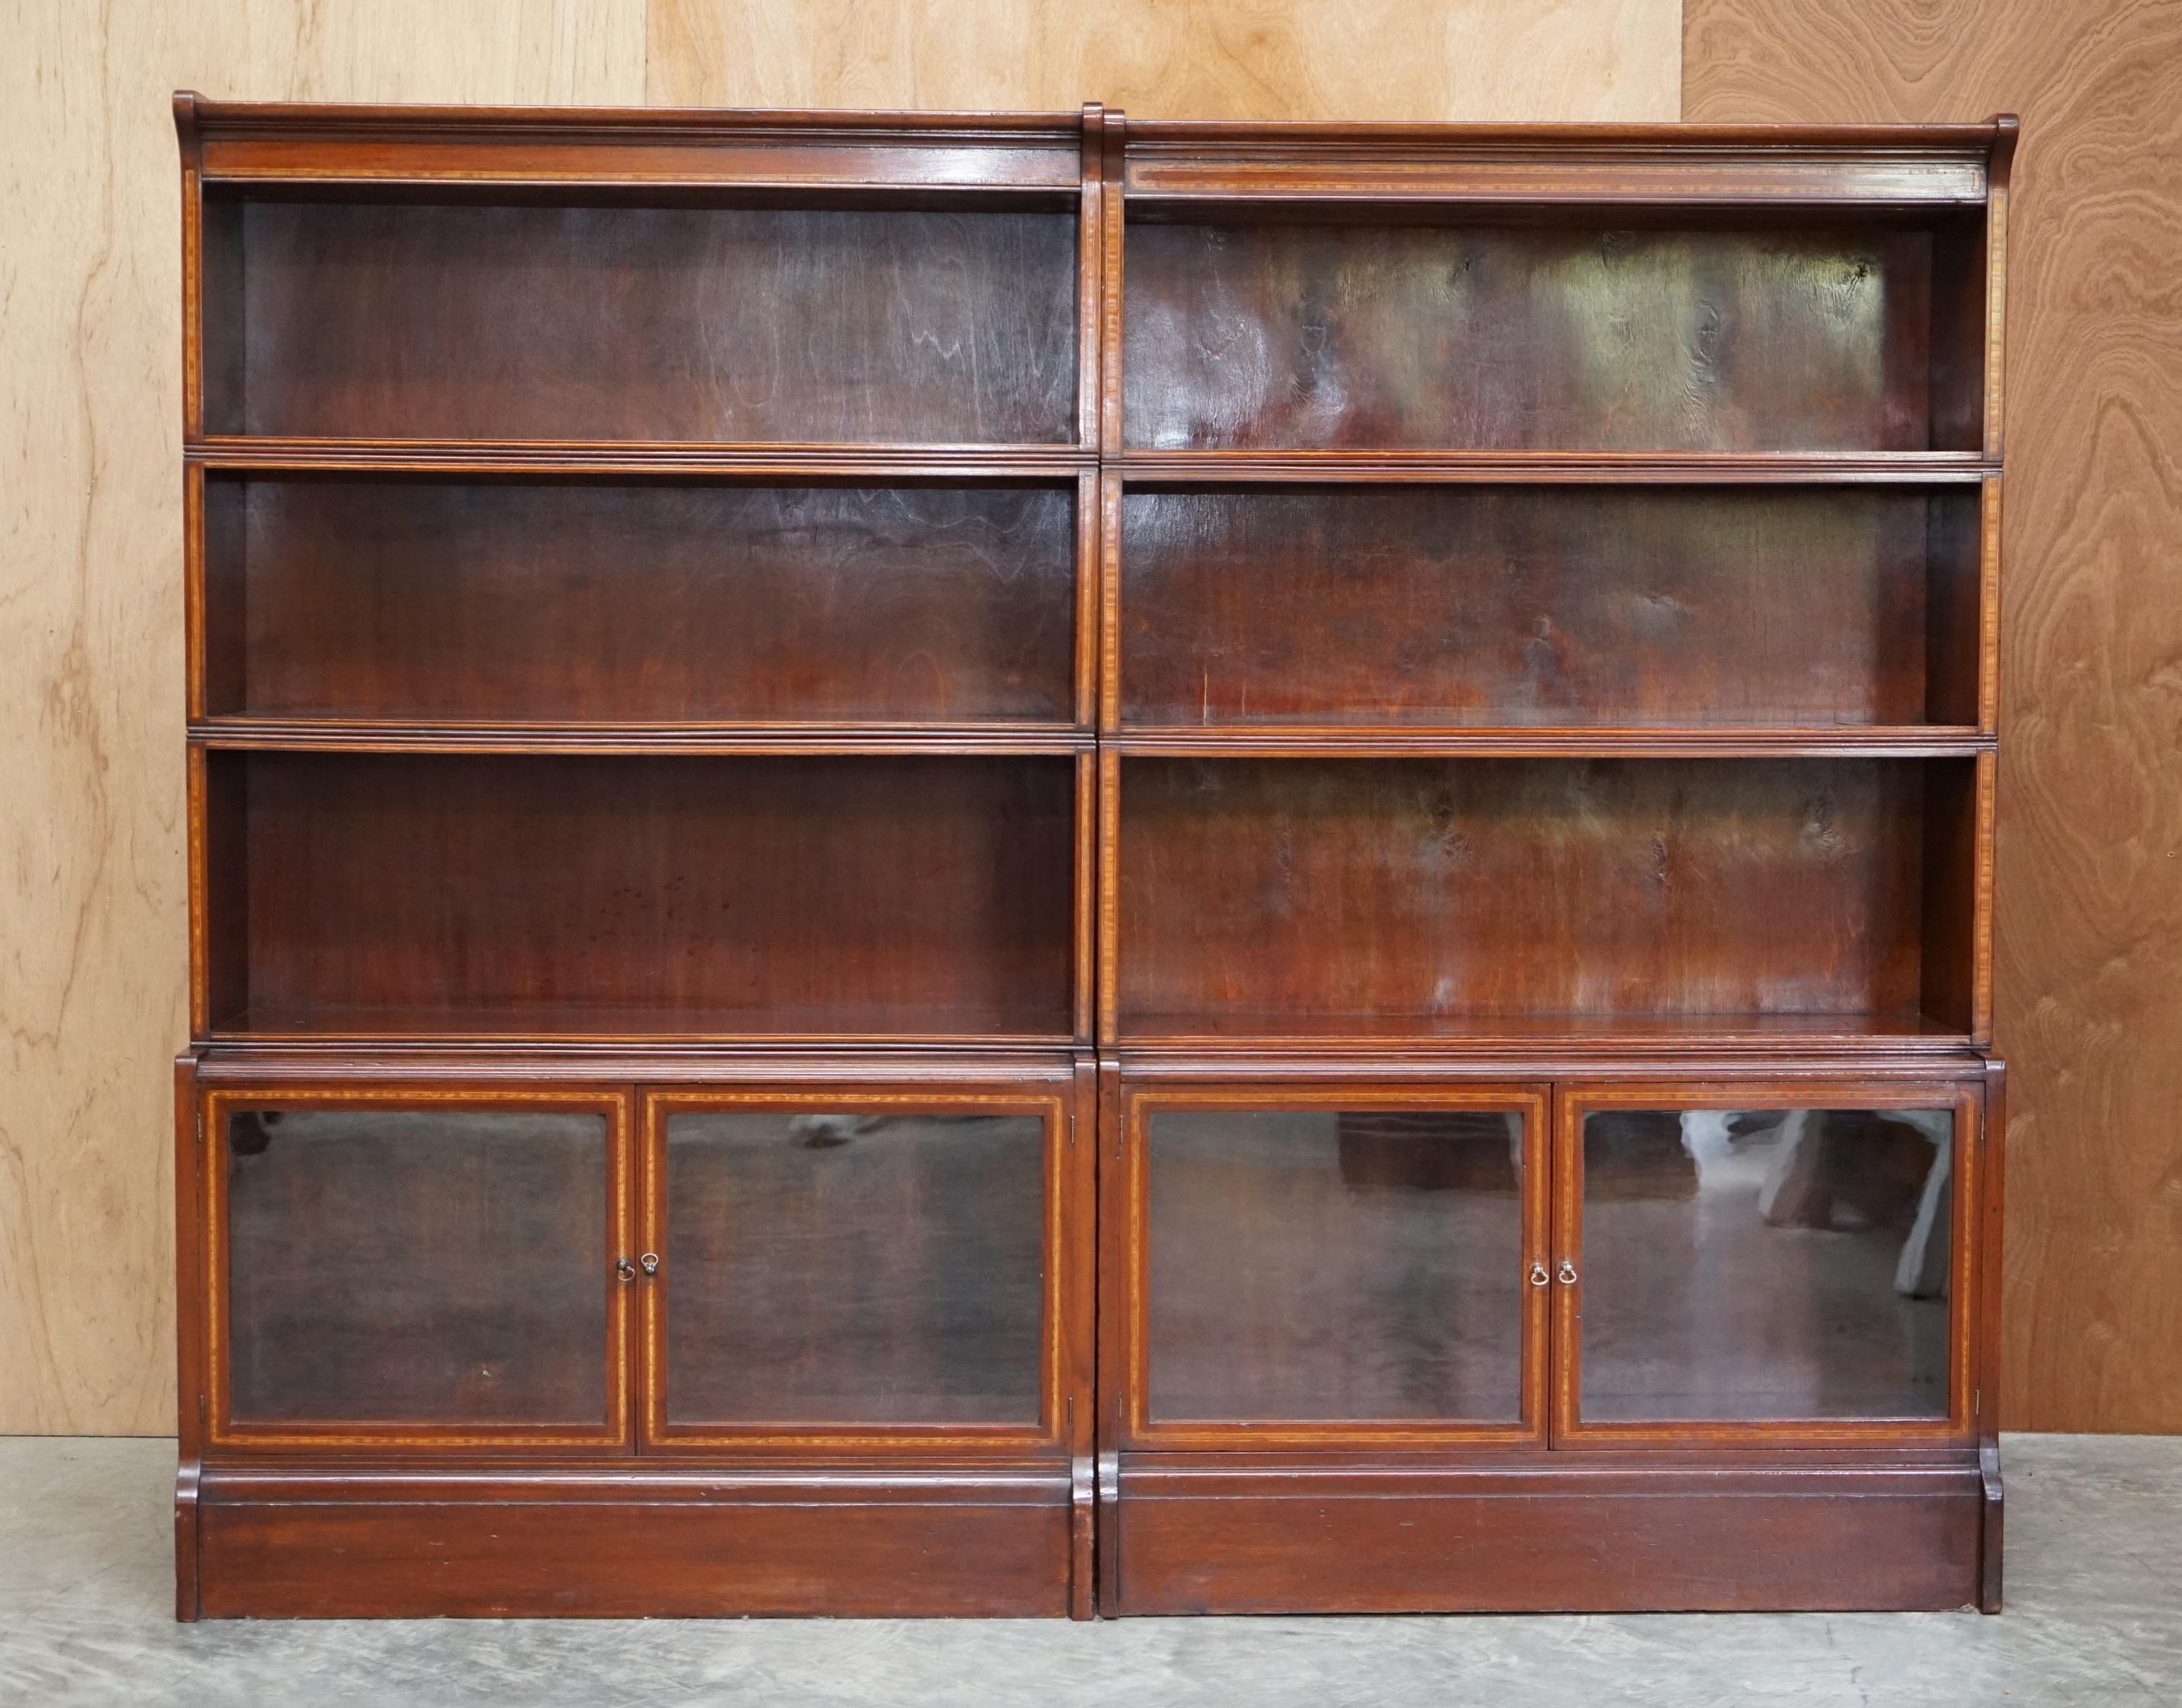 We are delighted to offer for sale this lovely pair of very rare original William Baker & Co Ltd “The Oxford” legal Library stacking bookcases

This are pretty much the finest pair of these bookcases I have seen, they are in a rich warm mahogany